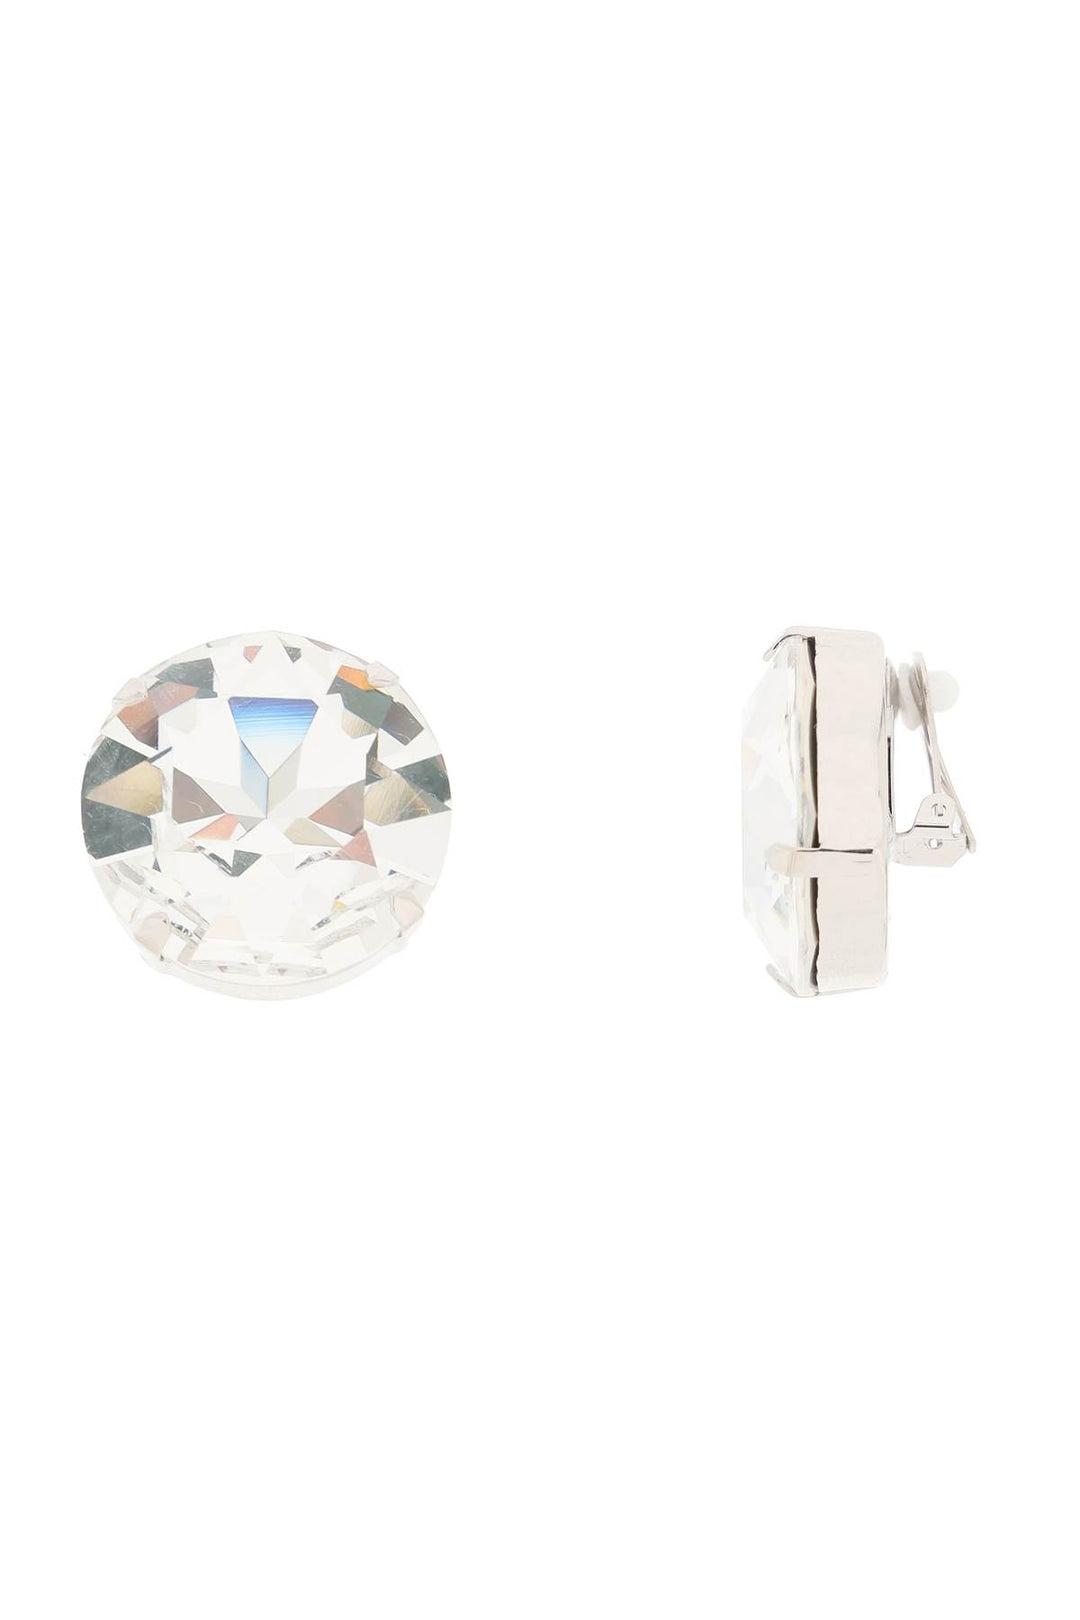 Alessandra Rich Large Crystal Clip On Earrings   Argento